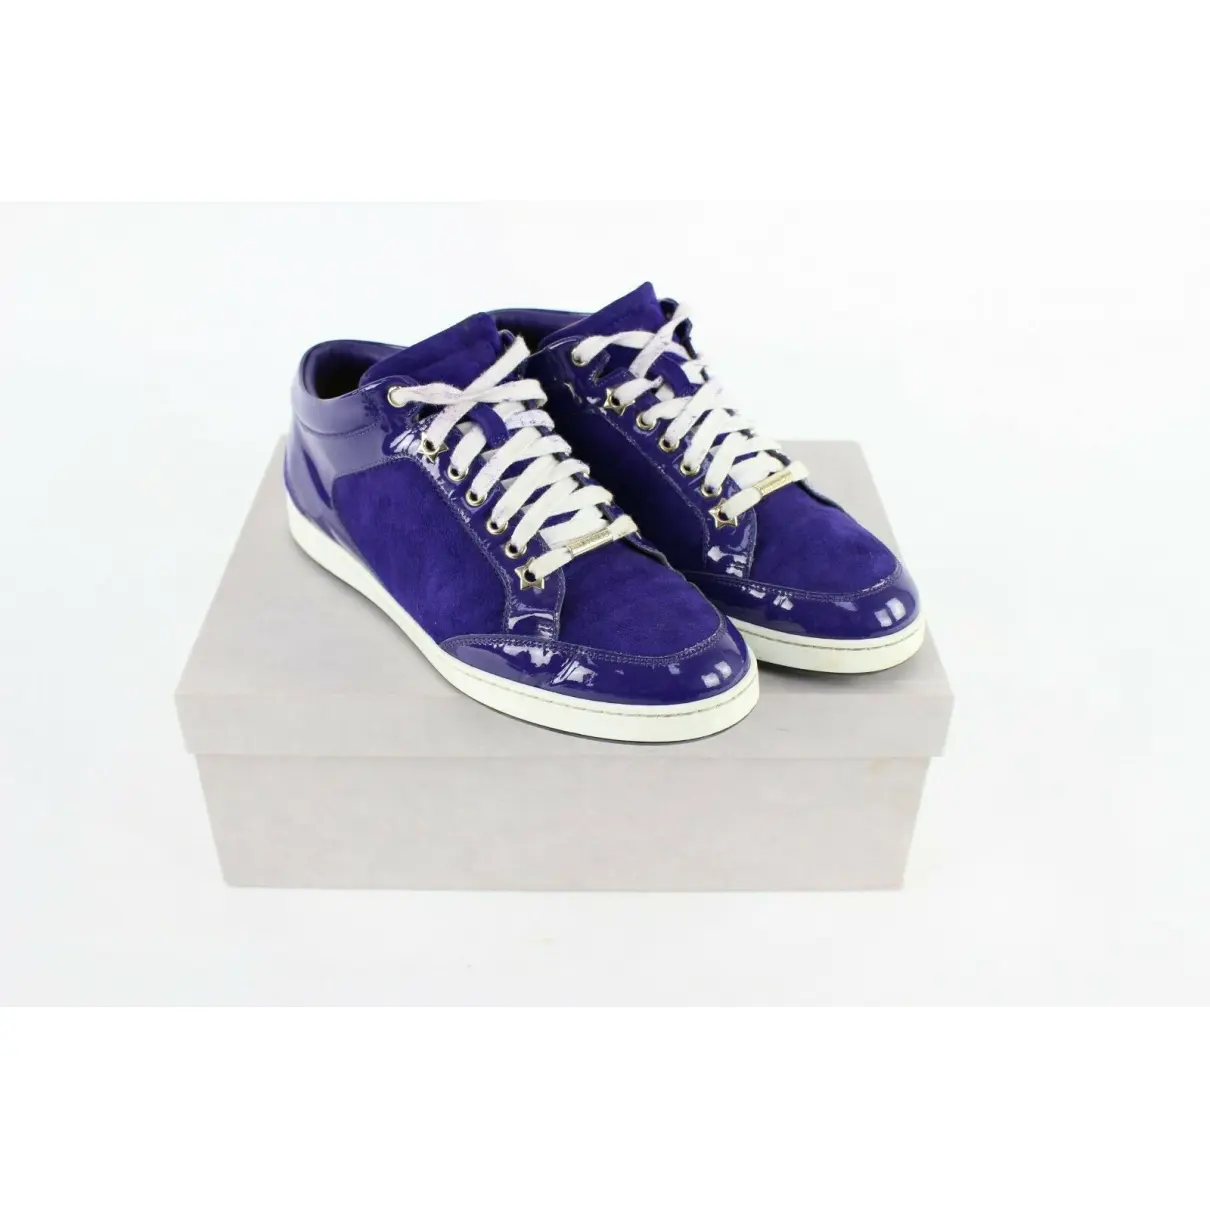 Buy Jimmy Choo Patent leather trainers online